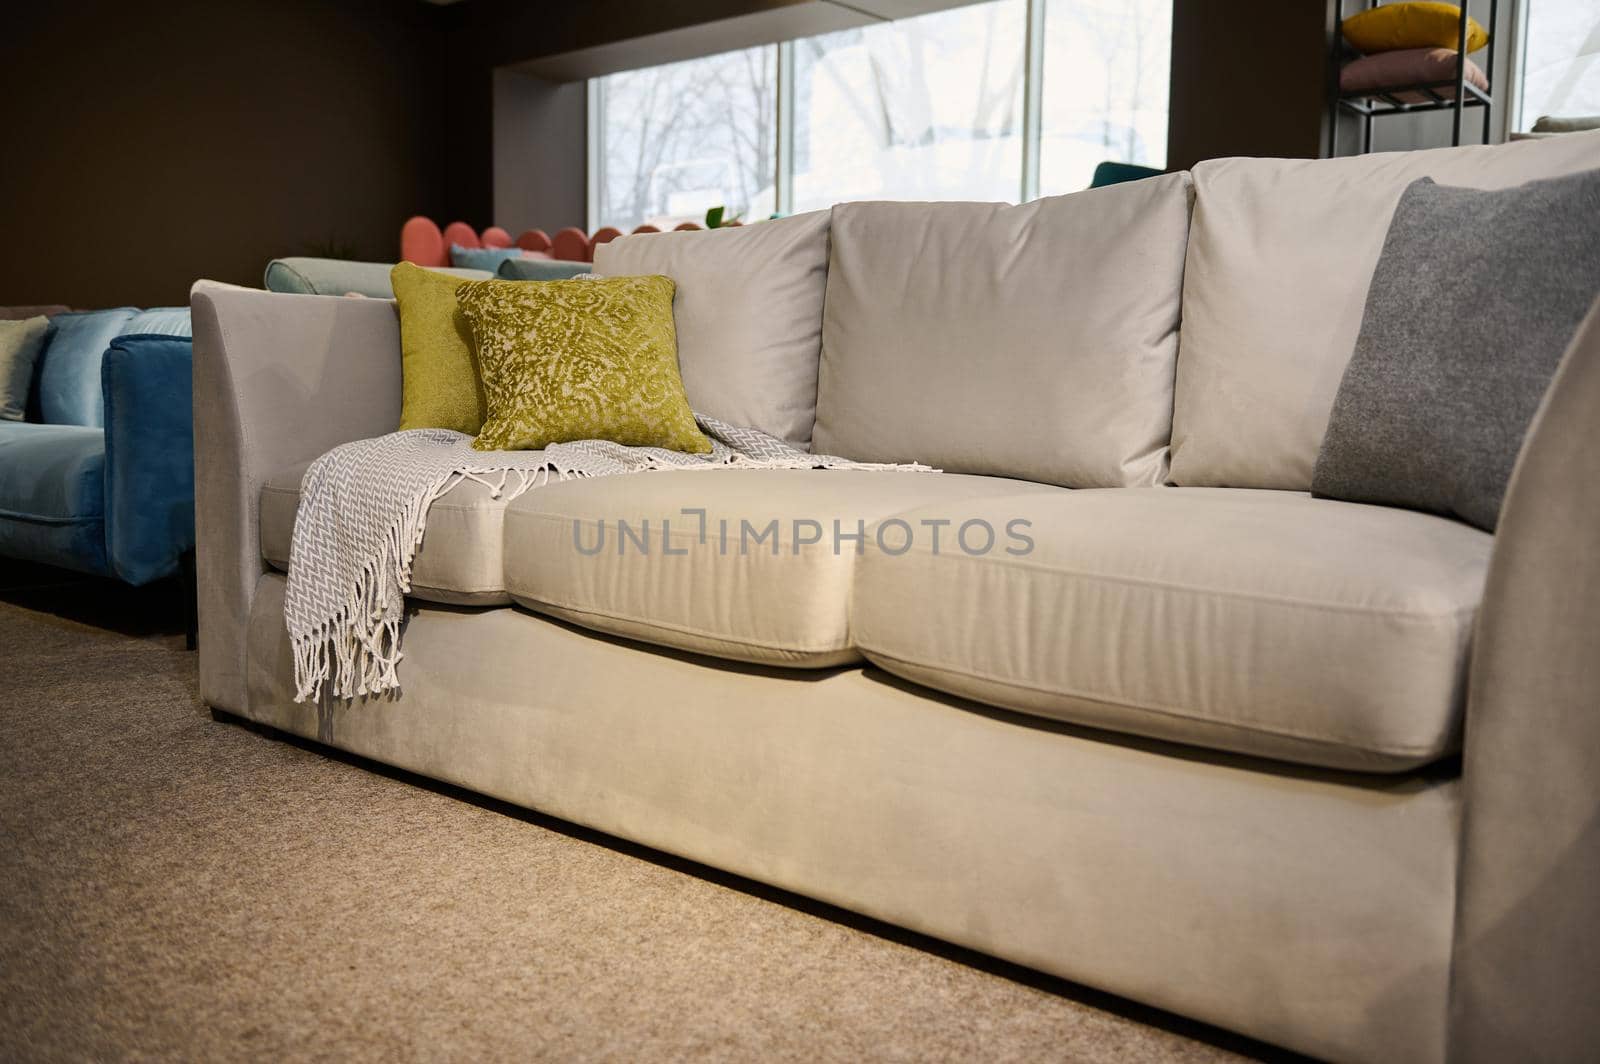 Comfortable upholstered velour beige couch with colored gray and green olive cushions displayed for sale in the furniture store showroom. Exhibition of upholstered furniture.